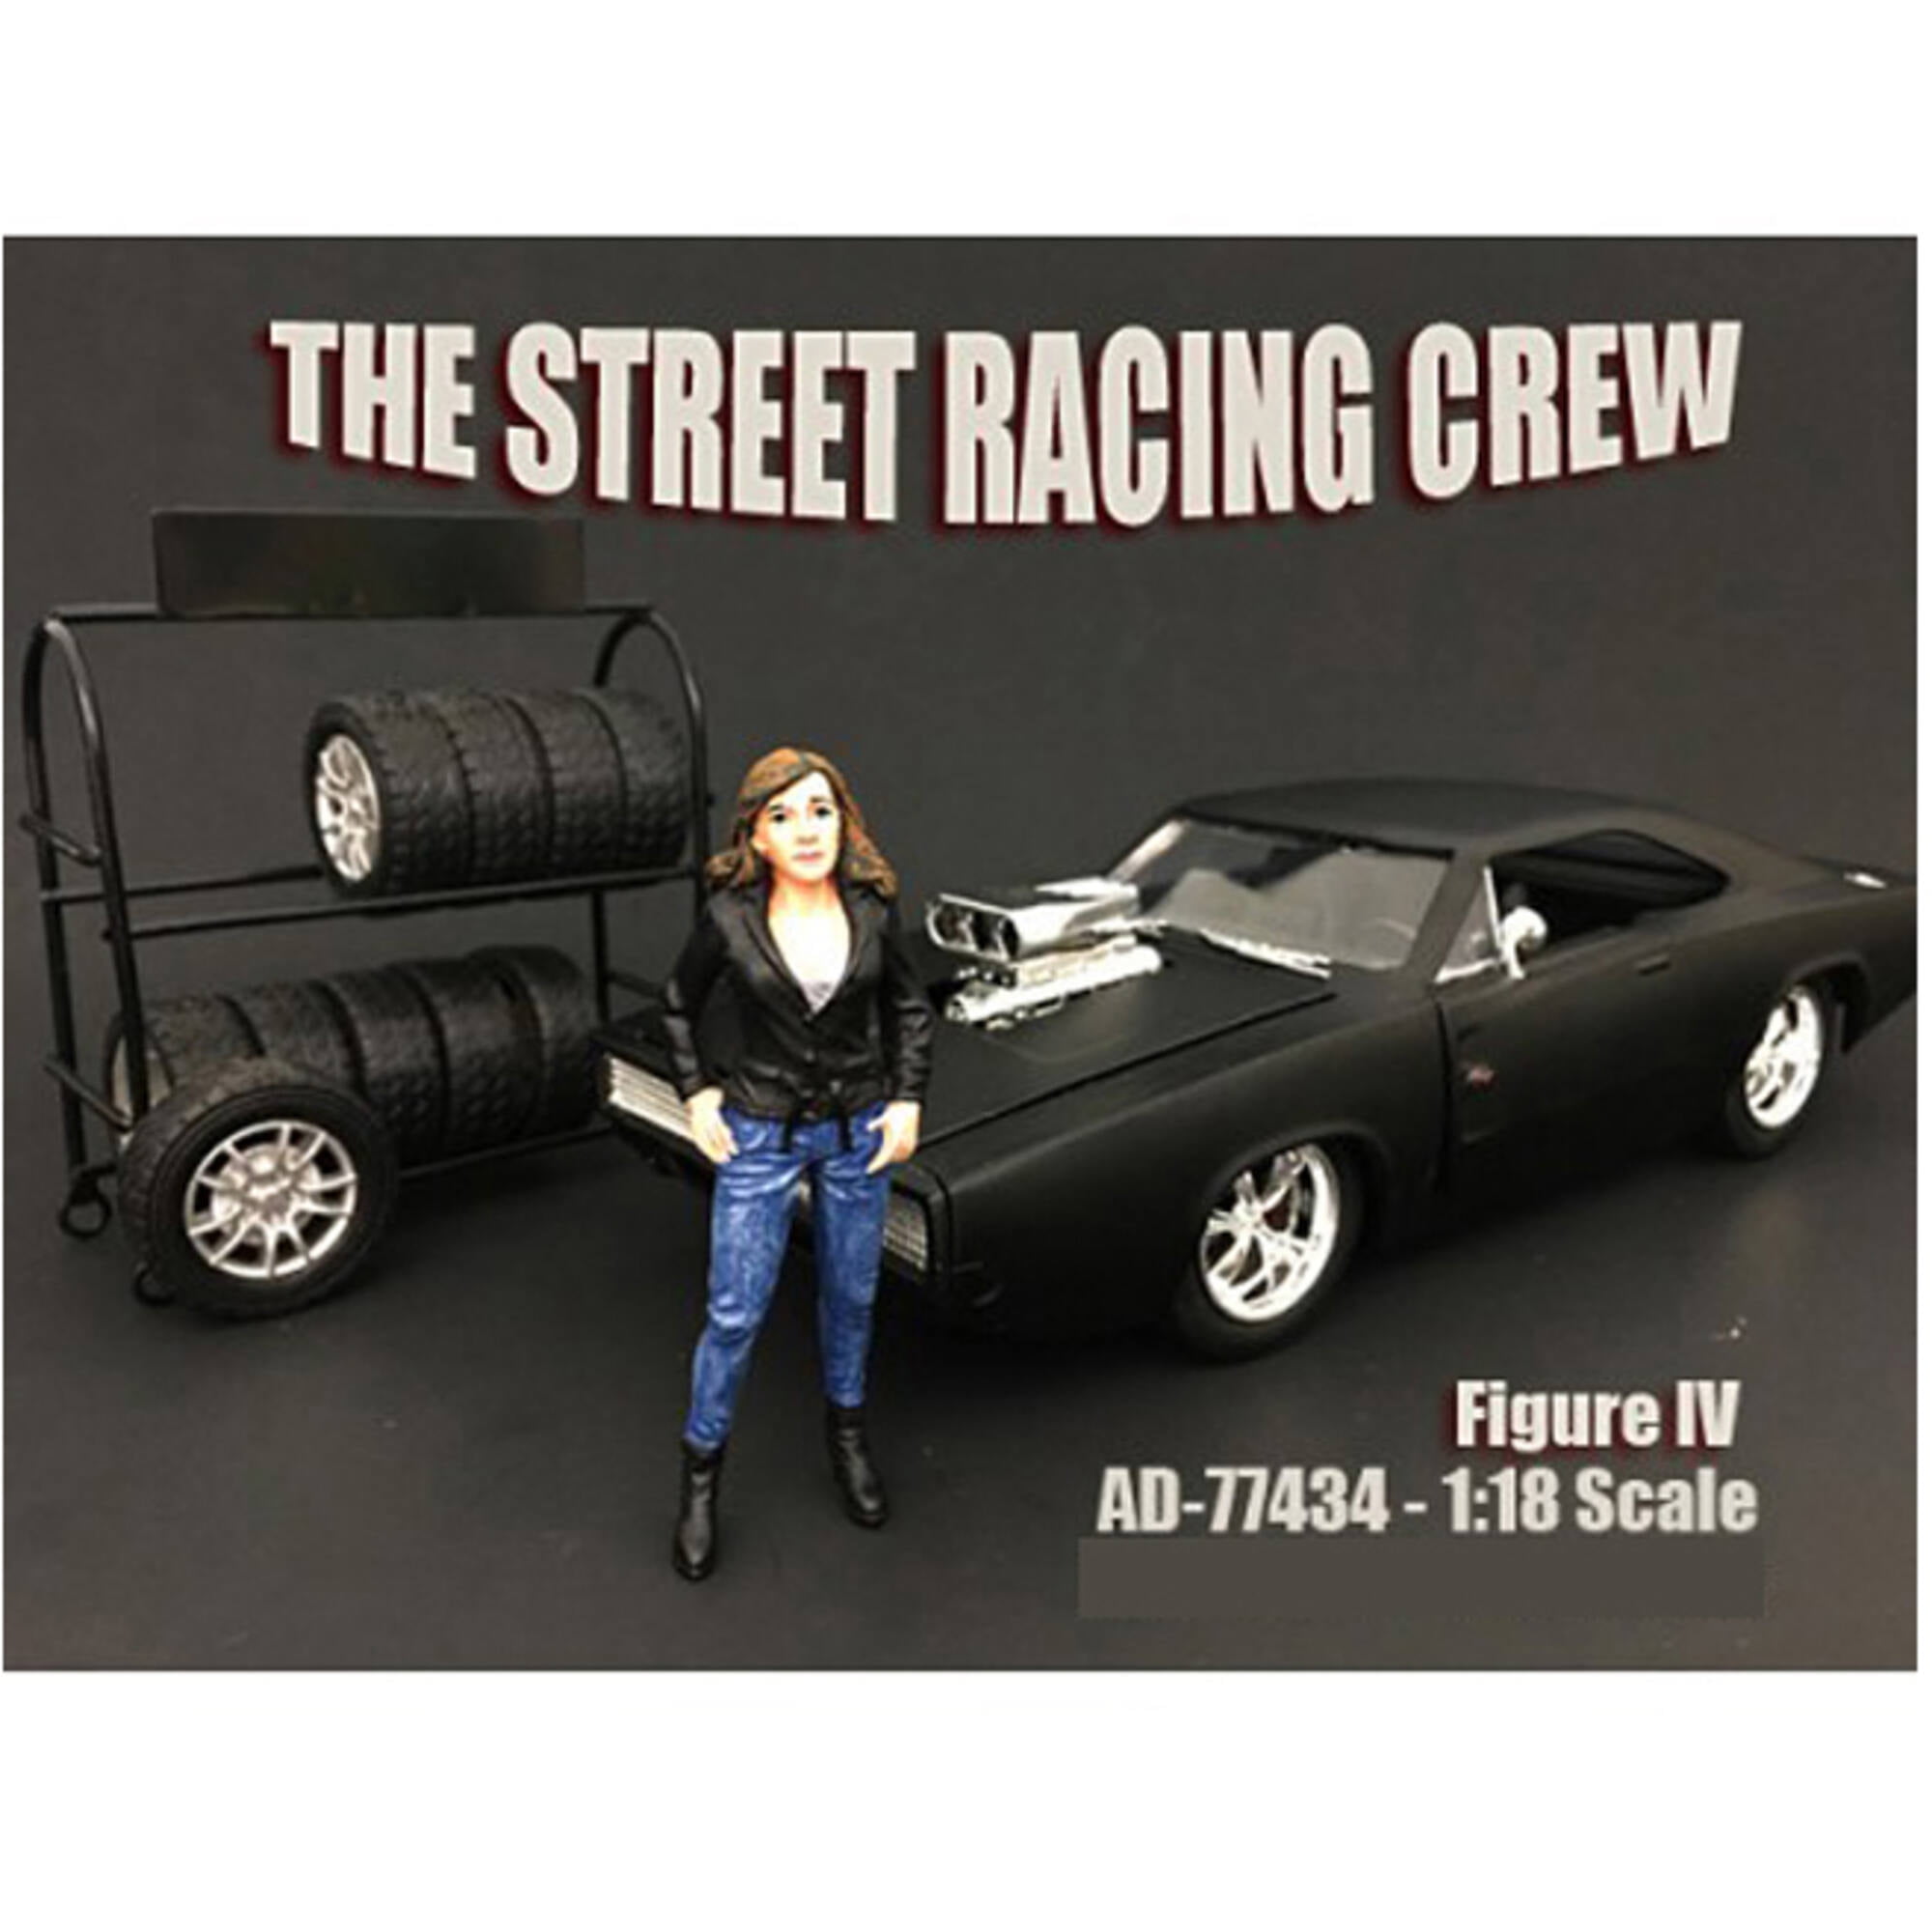 77434 The Street Racing Crew Figure Iv For 118 Scale Models